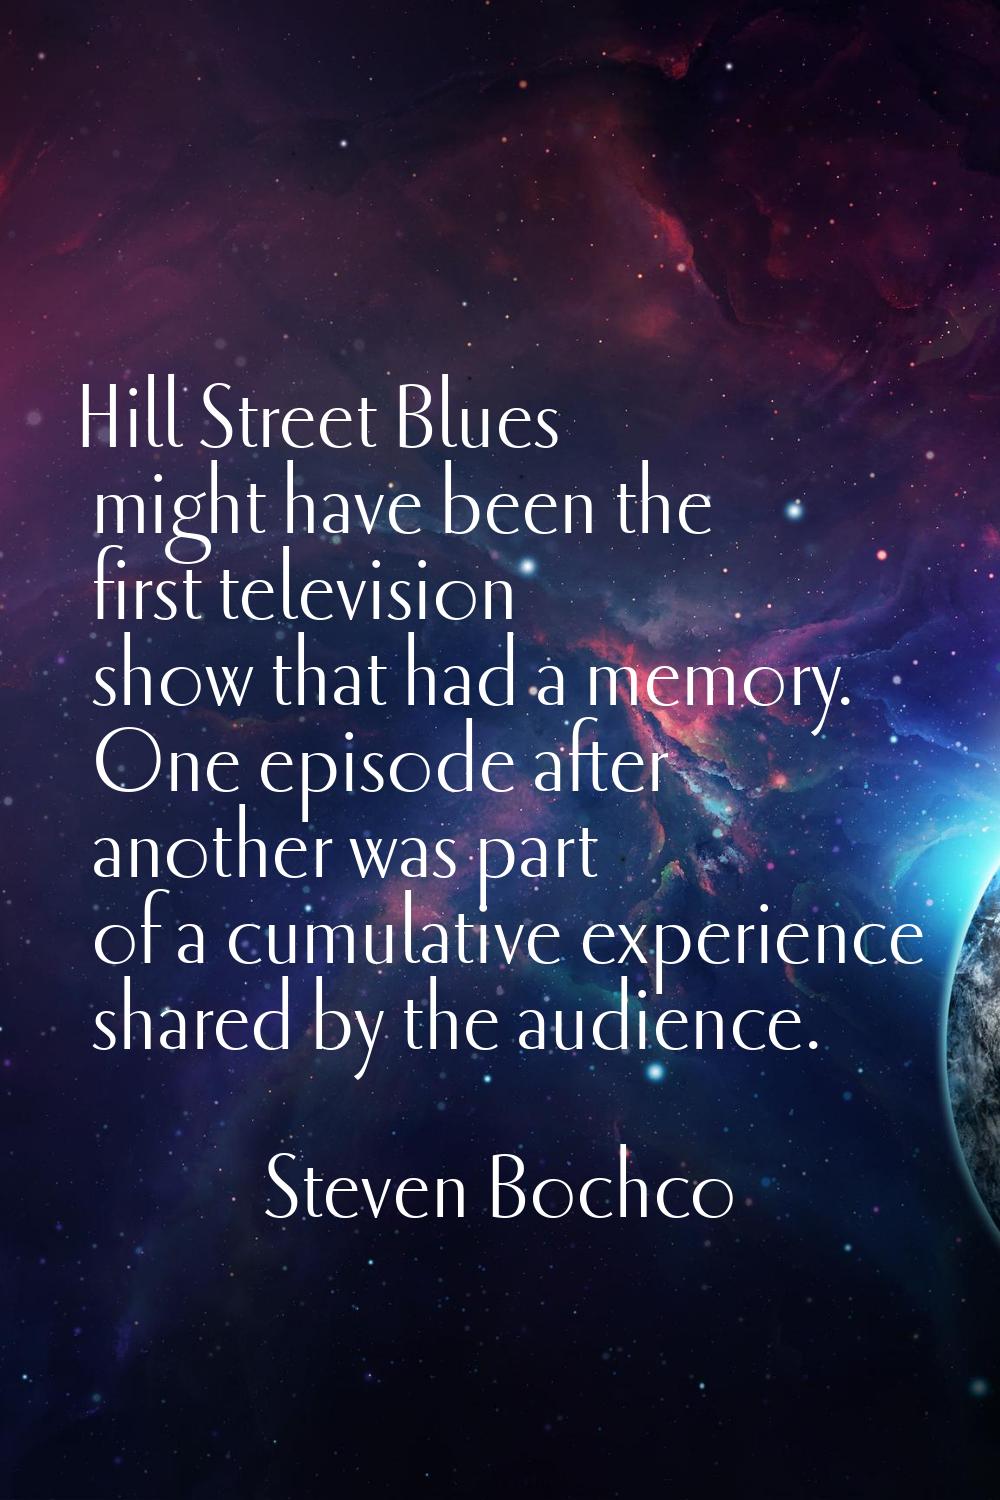 Hill Street Blues might have been the first television show that had a memory. One episode after an